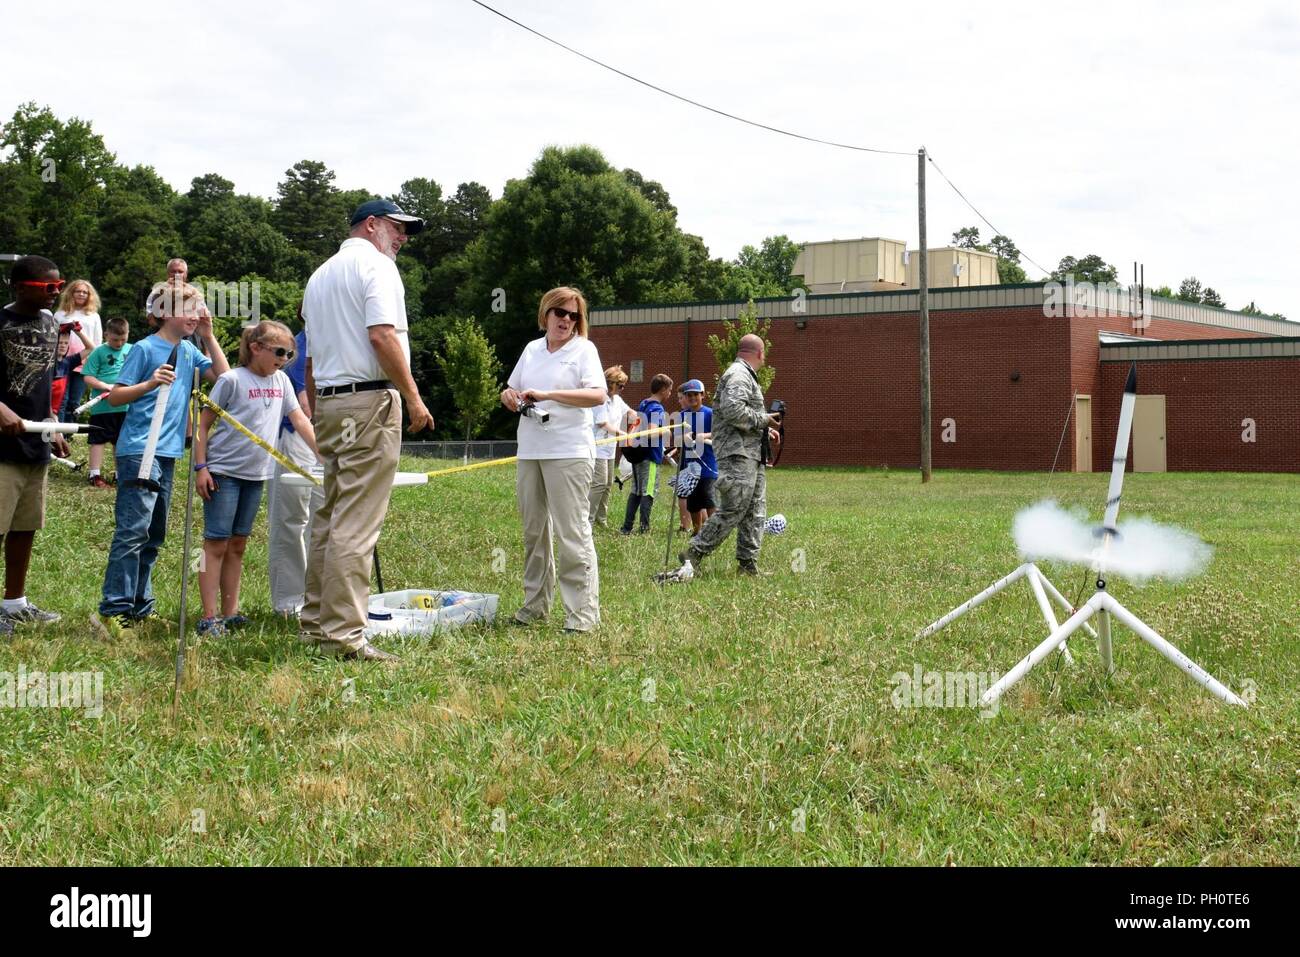 Parents, campers, and teachers watch as model rockets launch near Reid Park Academy Charlotte, N.C., June 21, 2018. The campers and teachers are part of the annual Department of Defense STARBASE summer camp program with the North Carolina Air National Guard and they learn various applications of science, technology, engineering, and math. Stock Photo